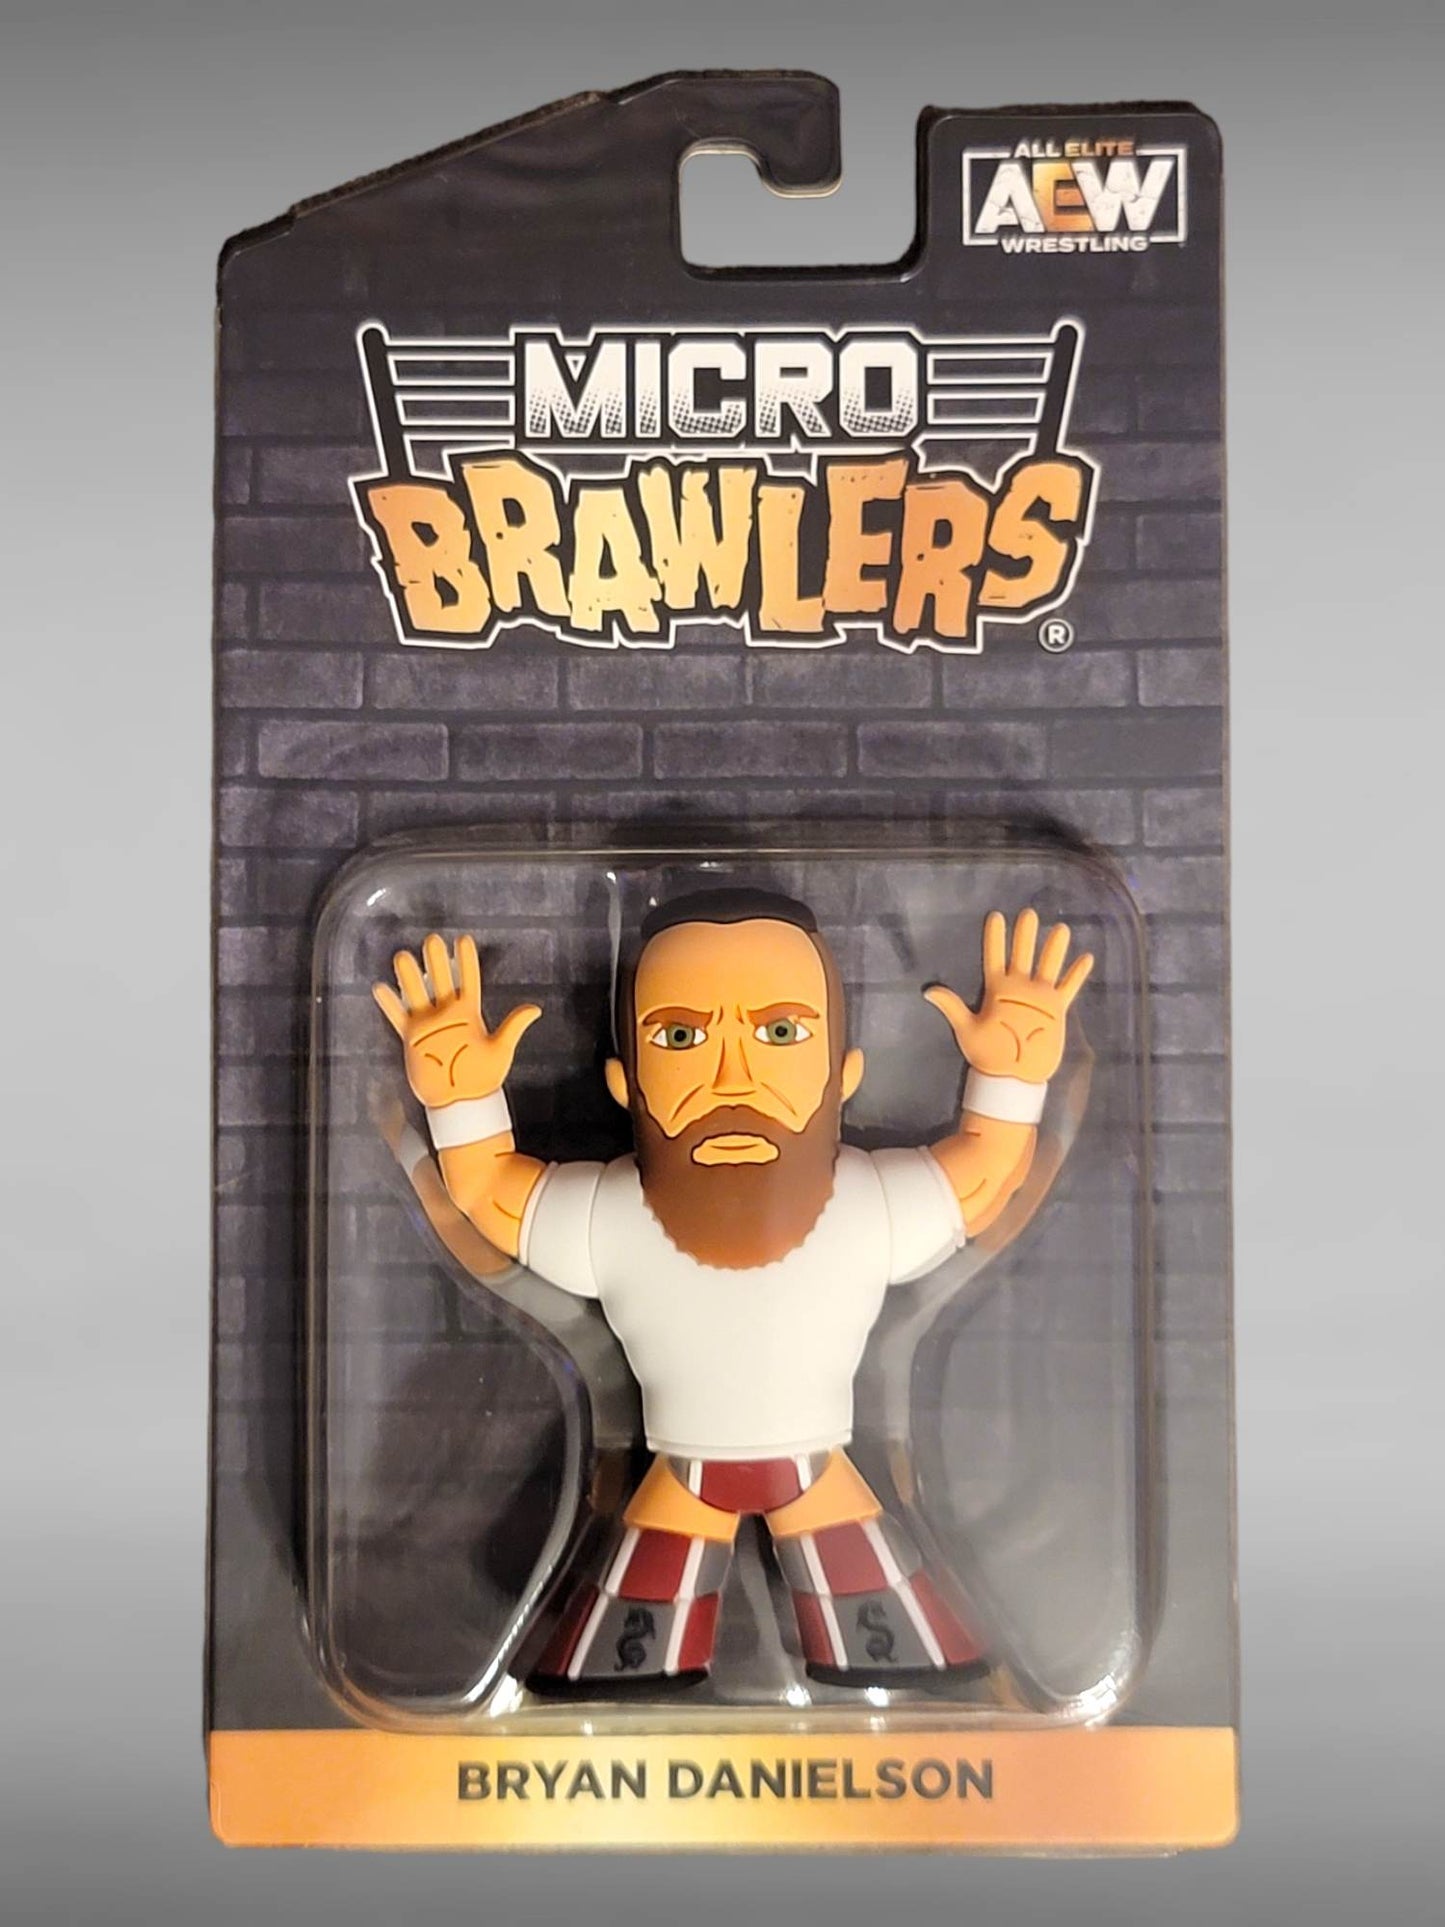 Really like these micro brawlers! : r/AEWOfficial